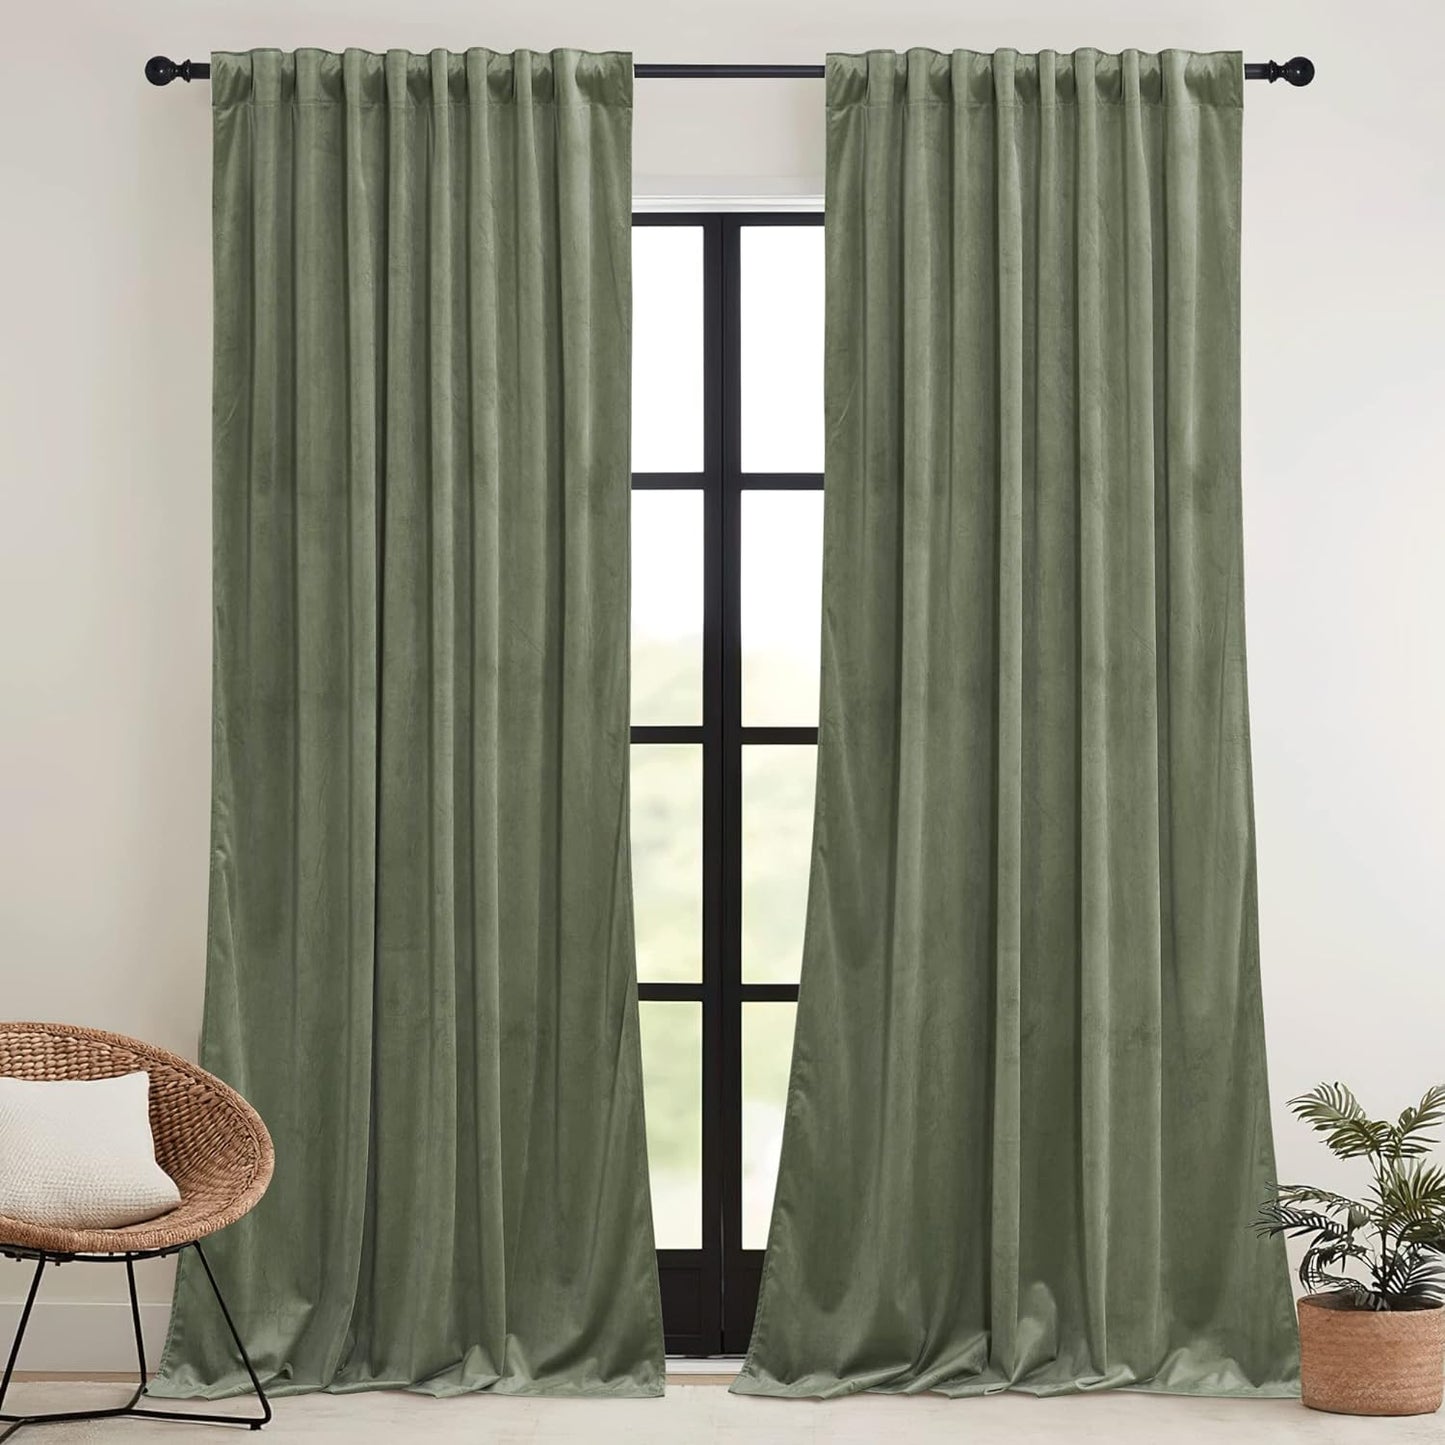 RYB HOME Sage Green Velvet Curtains 108 Inch, Room Darkening Super Soft Velvet Drapes for Living Room Thermal Insulated Pleat Tapes Window Treatment for Bedroom Playroom, W52 X L108 Inch, 2 Panels  RYB HOME   